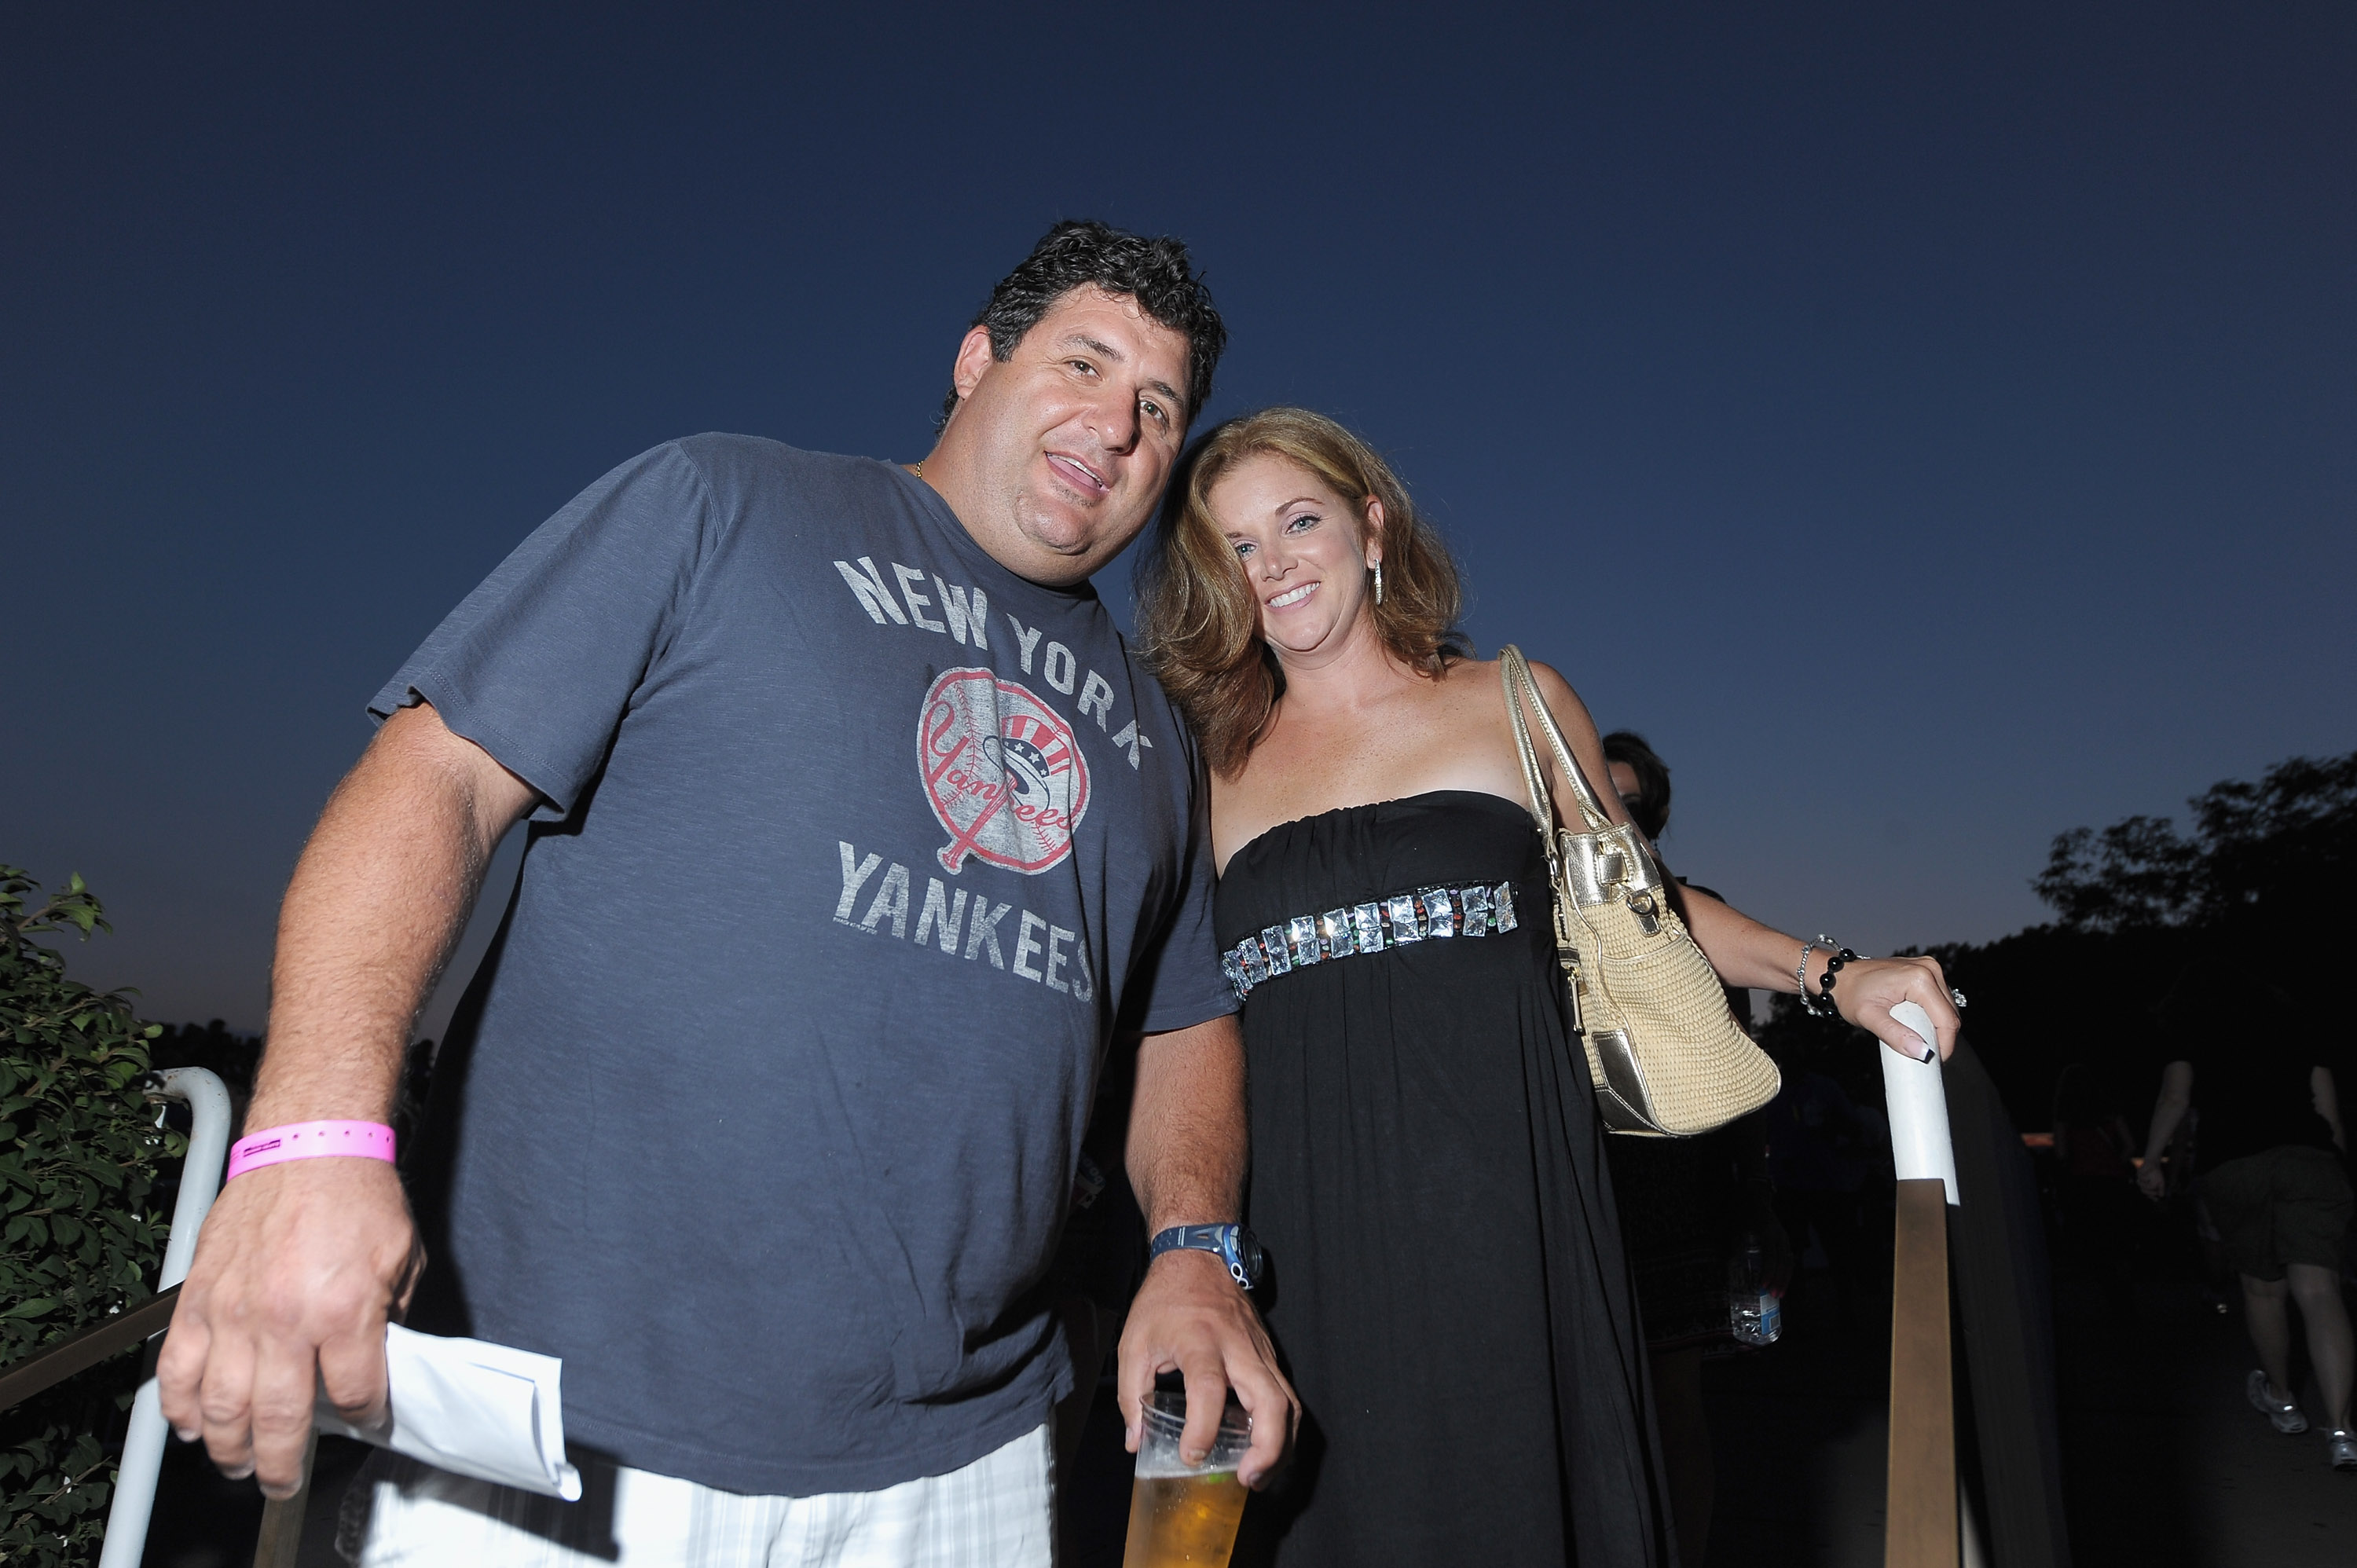 Tony Siragusa and his wife Kathy Giacalone Siragusa attend the Selena Gomez performance at the PNC Bank Arts Center on August 20, 2011, in Holmdel, New Jersey. | Source: Getty Images